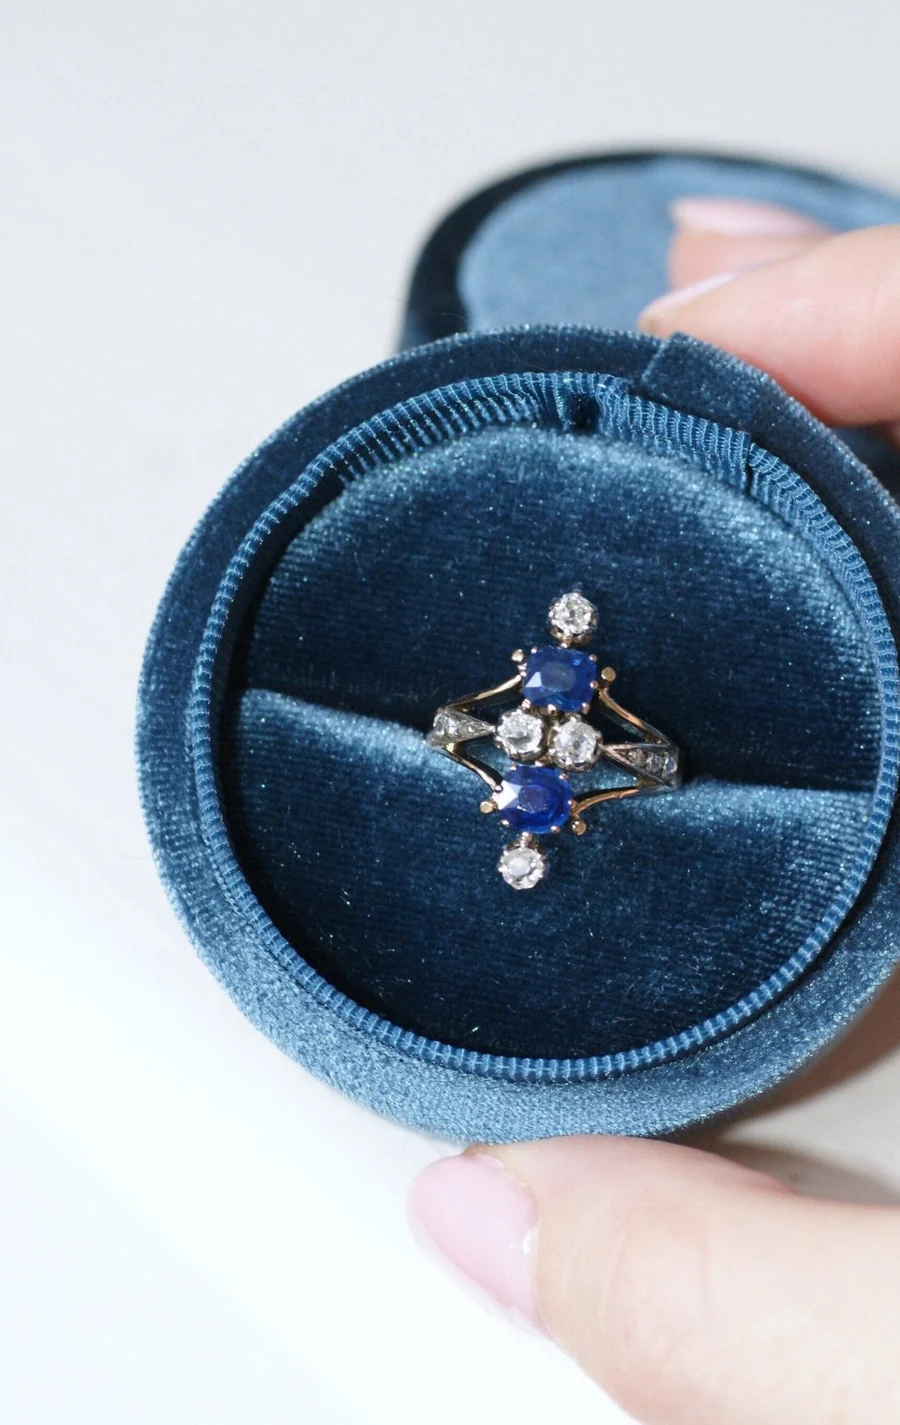 Marquise sapphire and diamond ring - Penelope Gallery